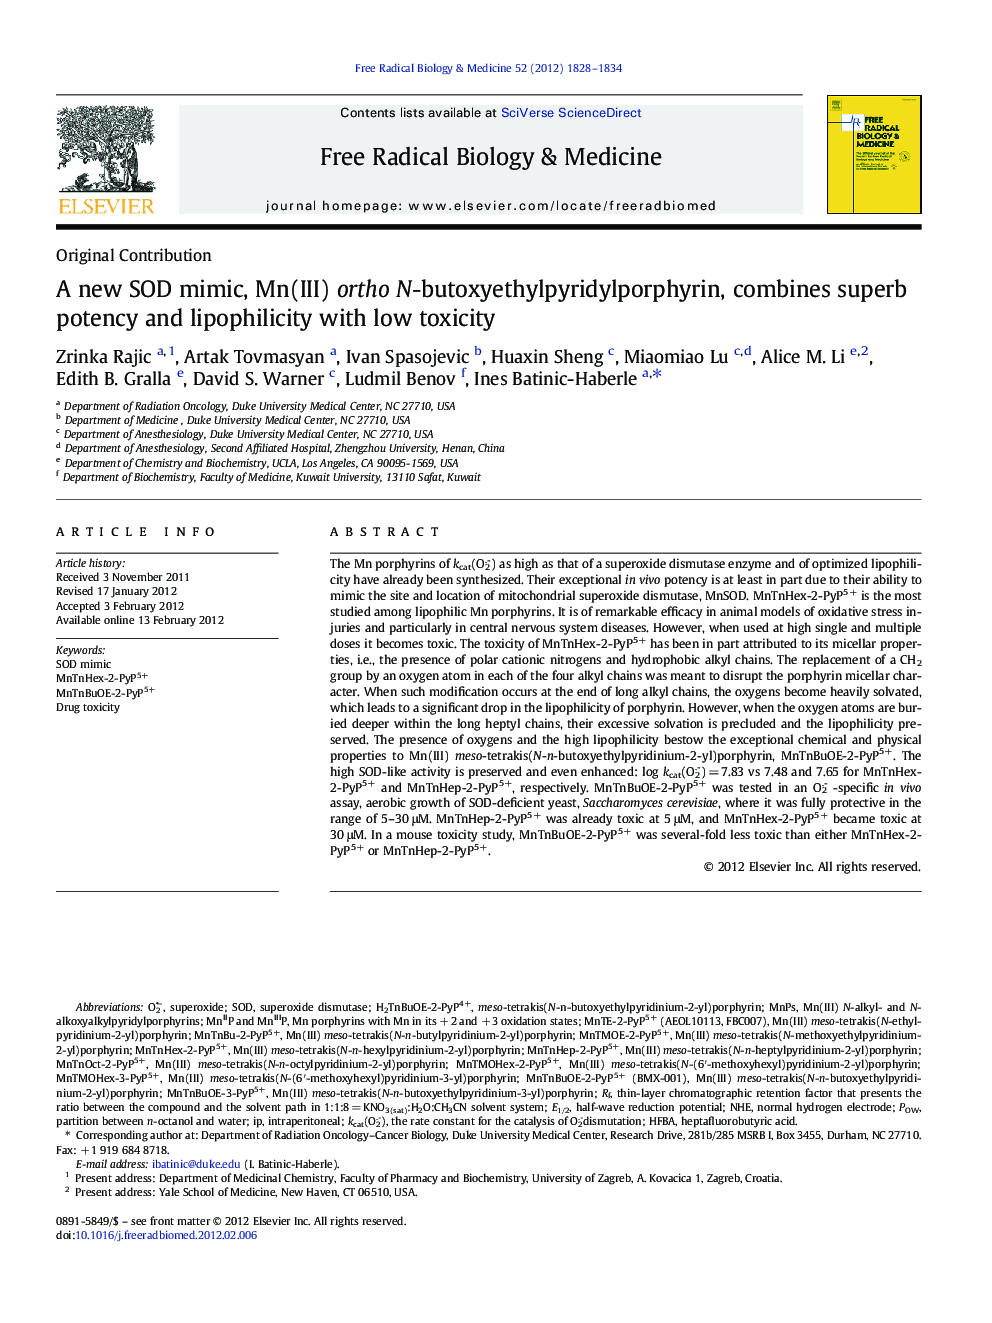 A new SOD mimic, Mn(III) ortho N-butoxyethylpyridylporphyrin, combines superb potency and lipophilicity with low toxicity